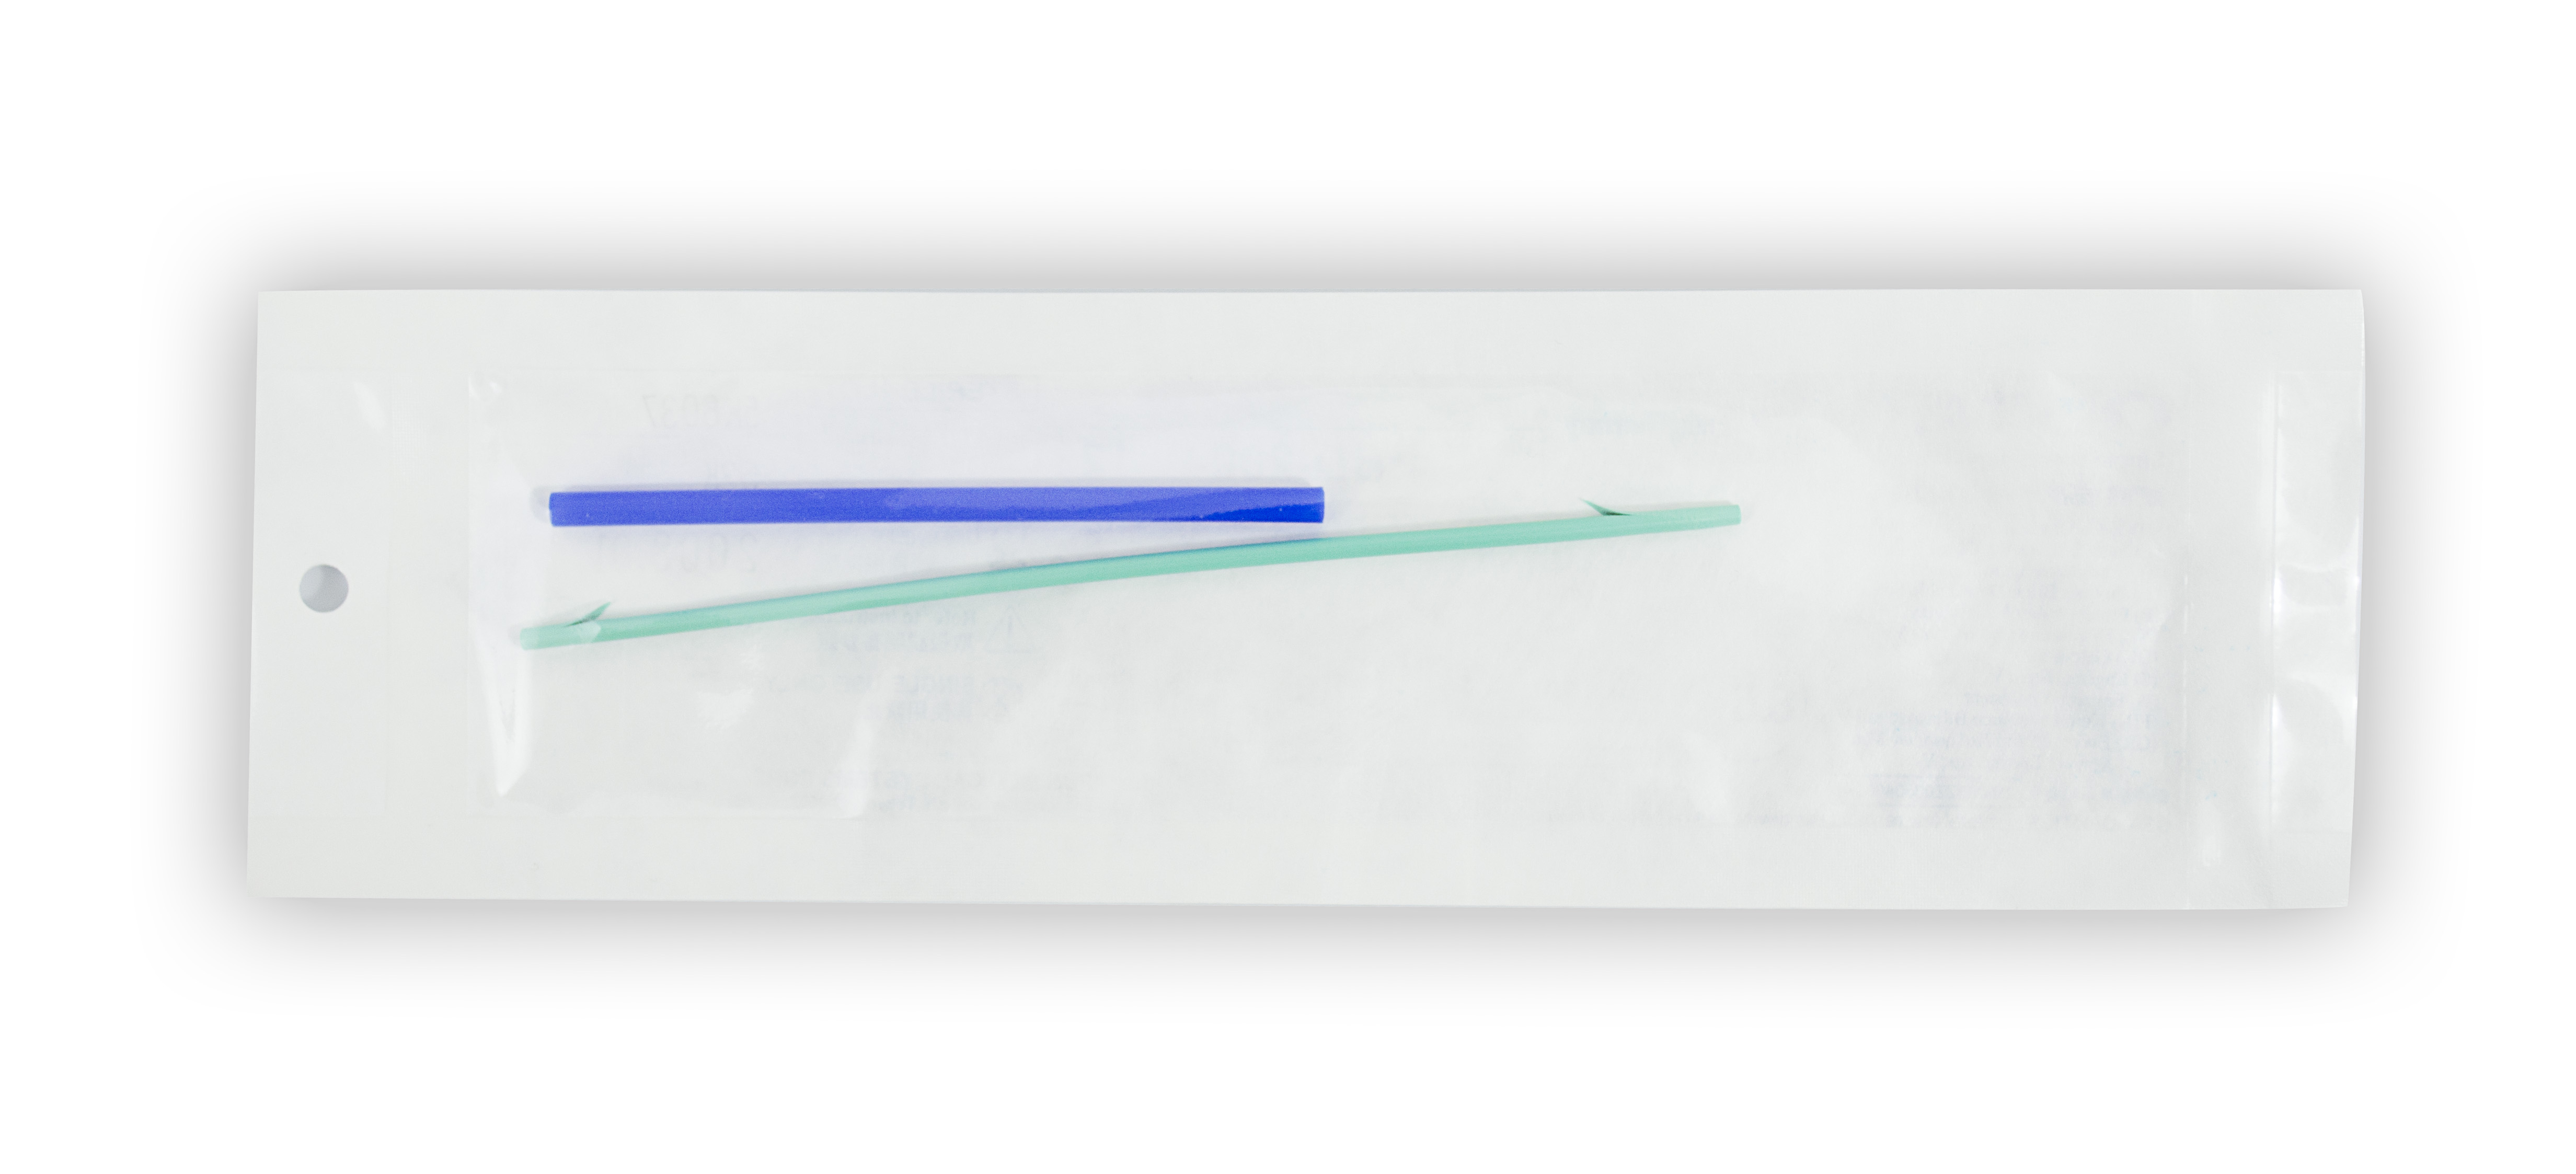 [Out-of-Date] Olympus Disposable Biliary Drainage Tube - PBD-200-0812